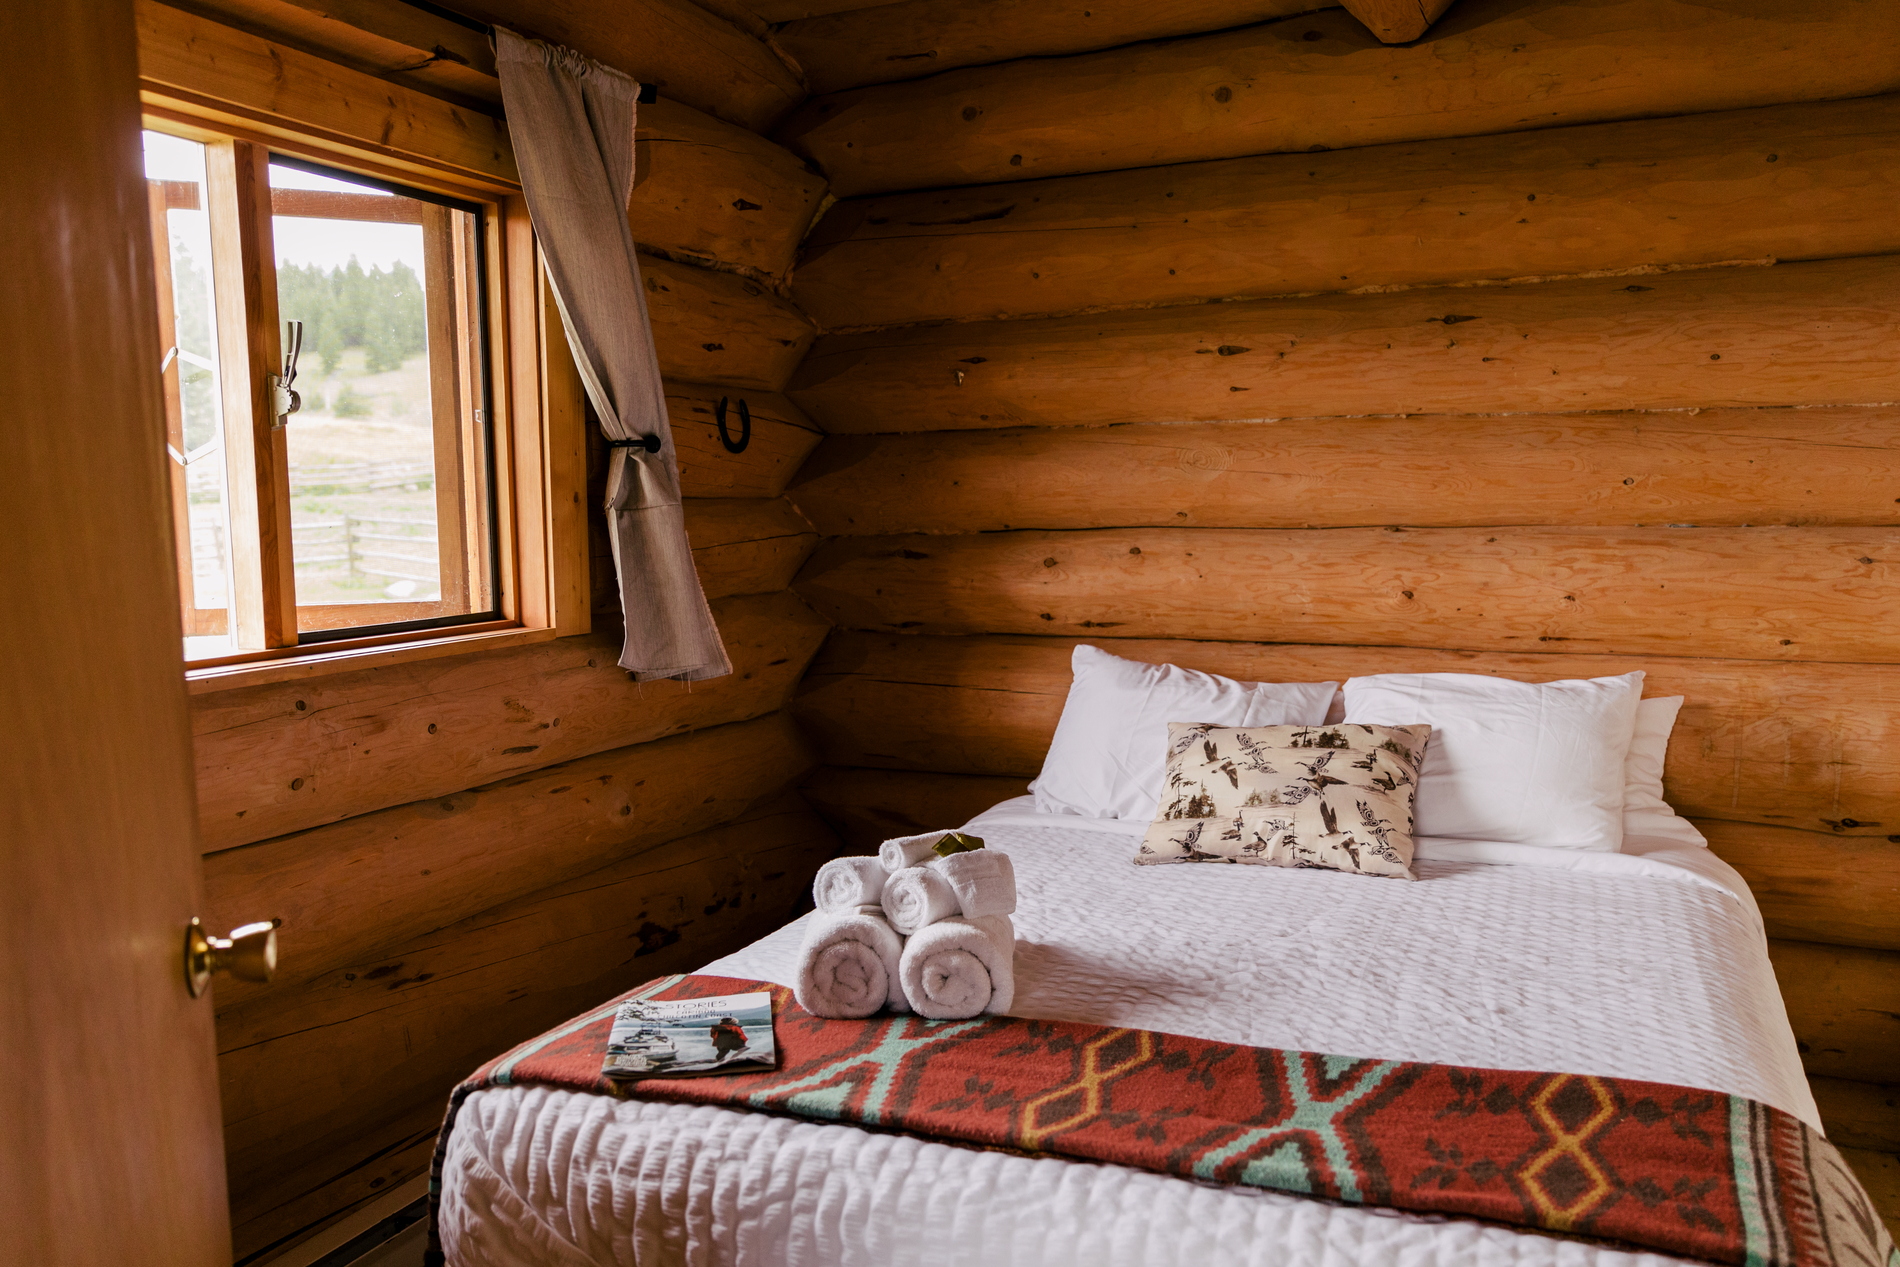 A queen size bed inside a log cabin at the Big Bar Guest Ranch. A window next to the bed is open letting in the air and light.